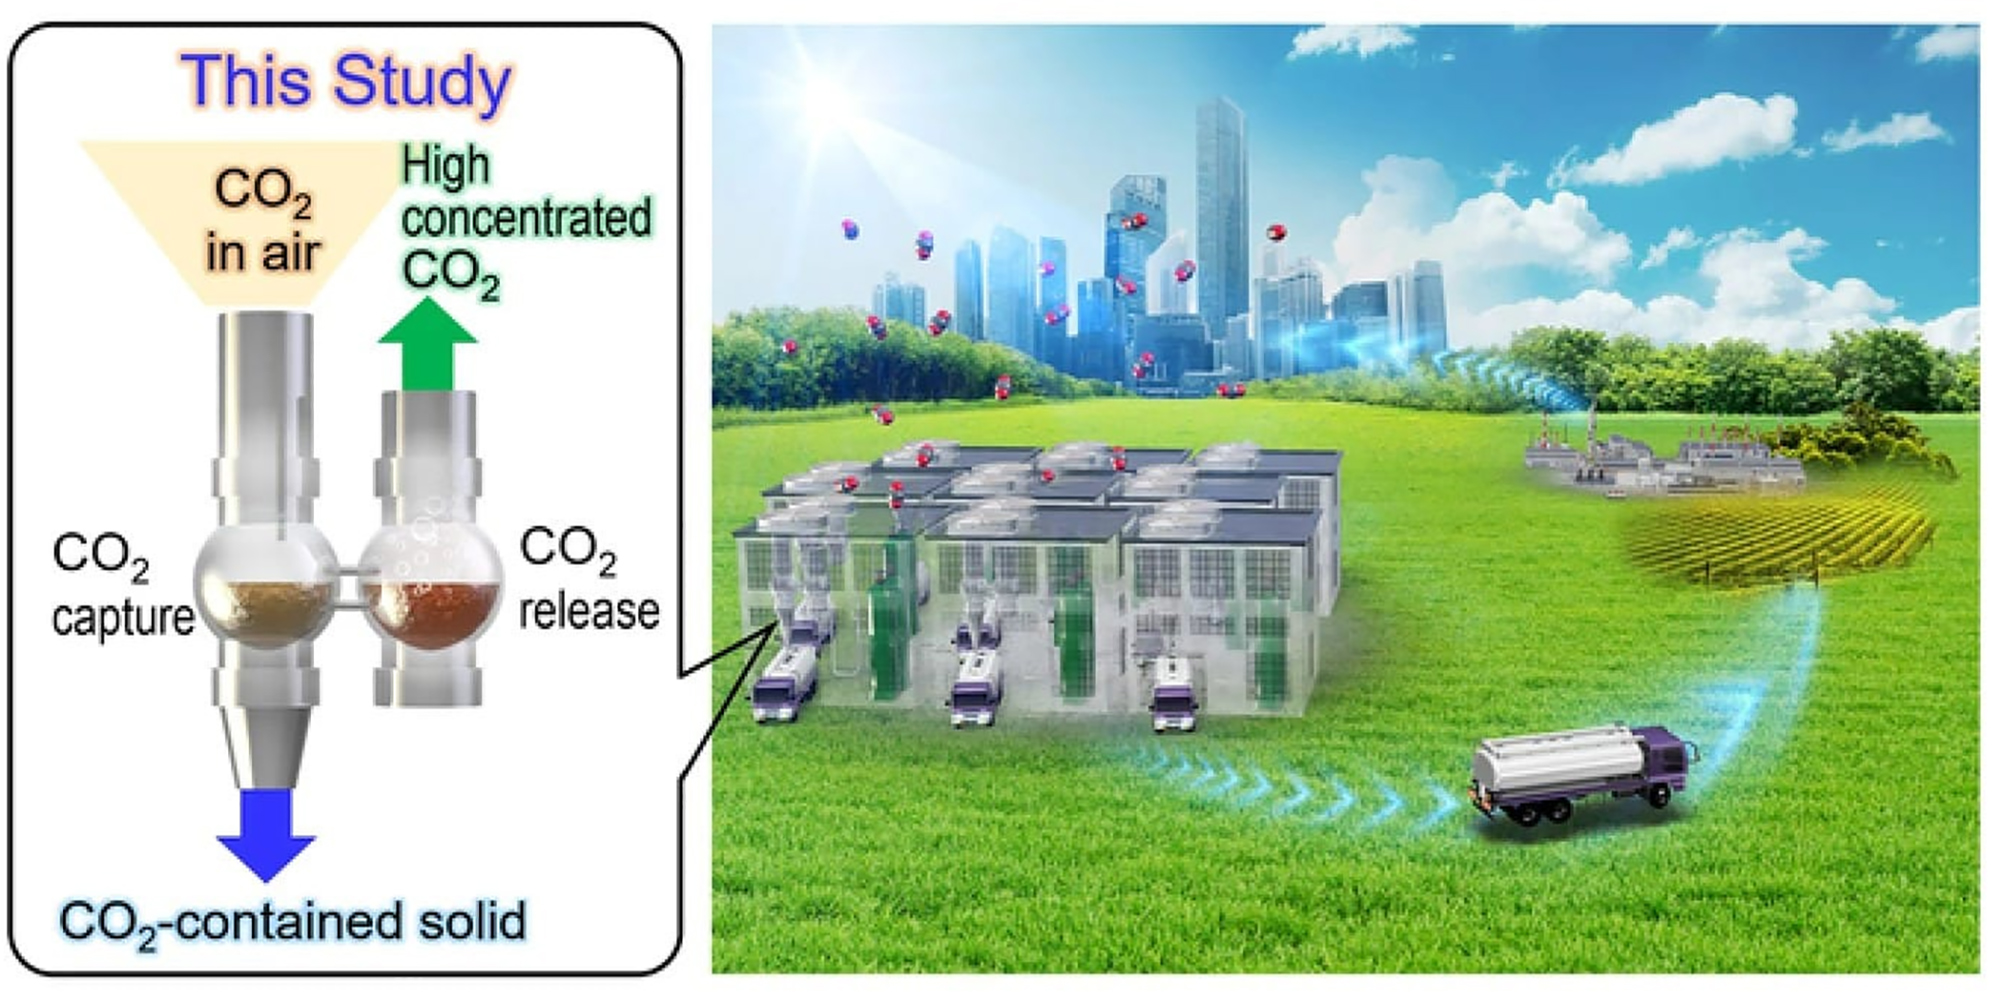 High-speed carbon dioxide catcher heralds new era in fight against climate change